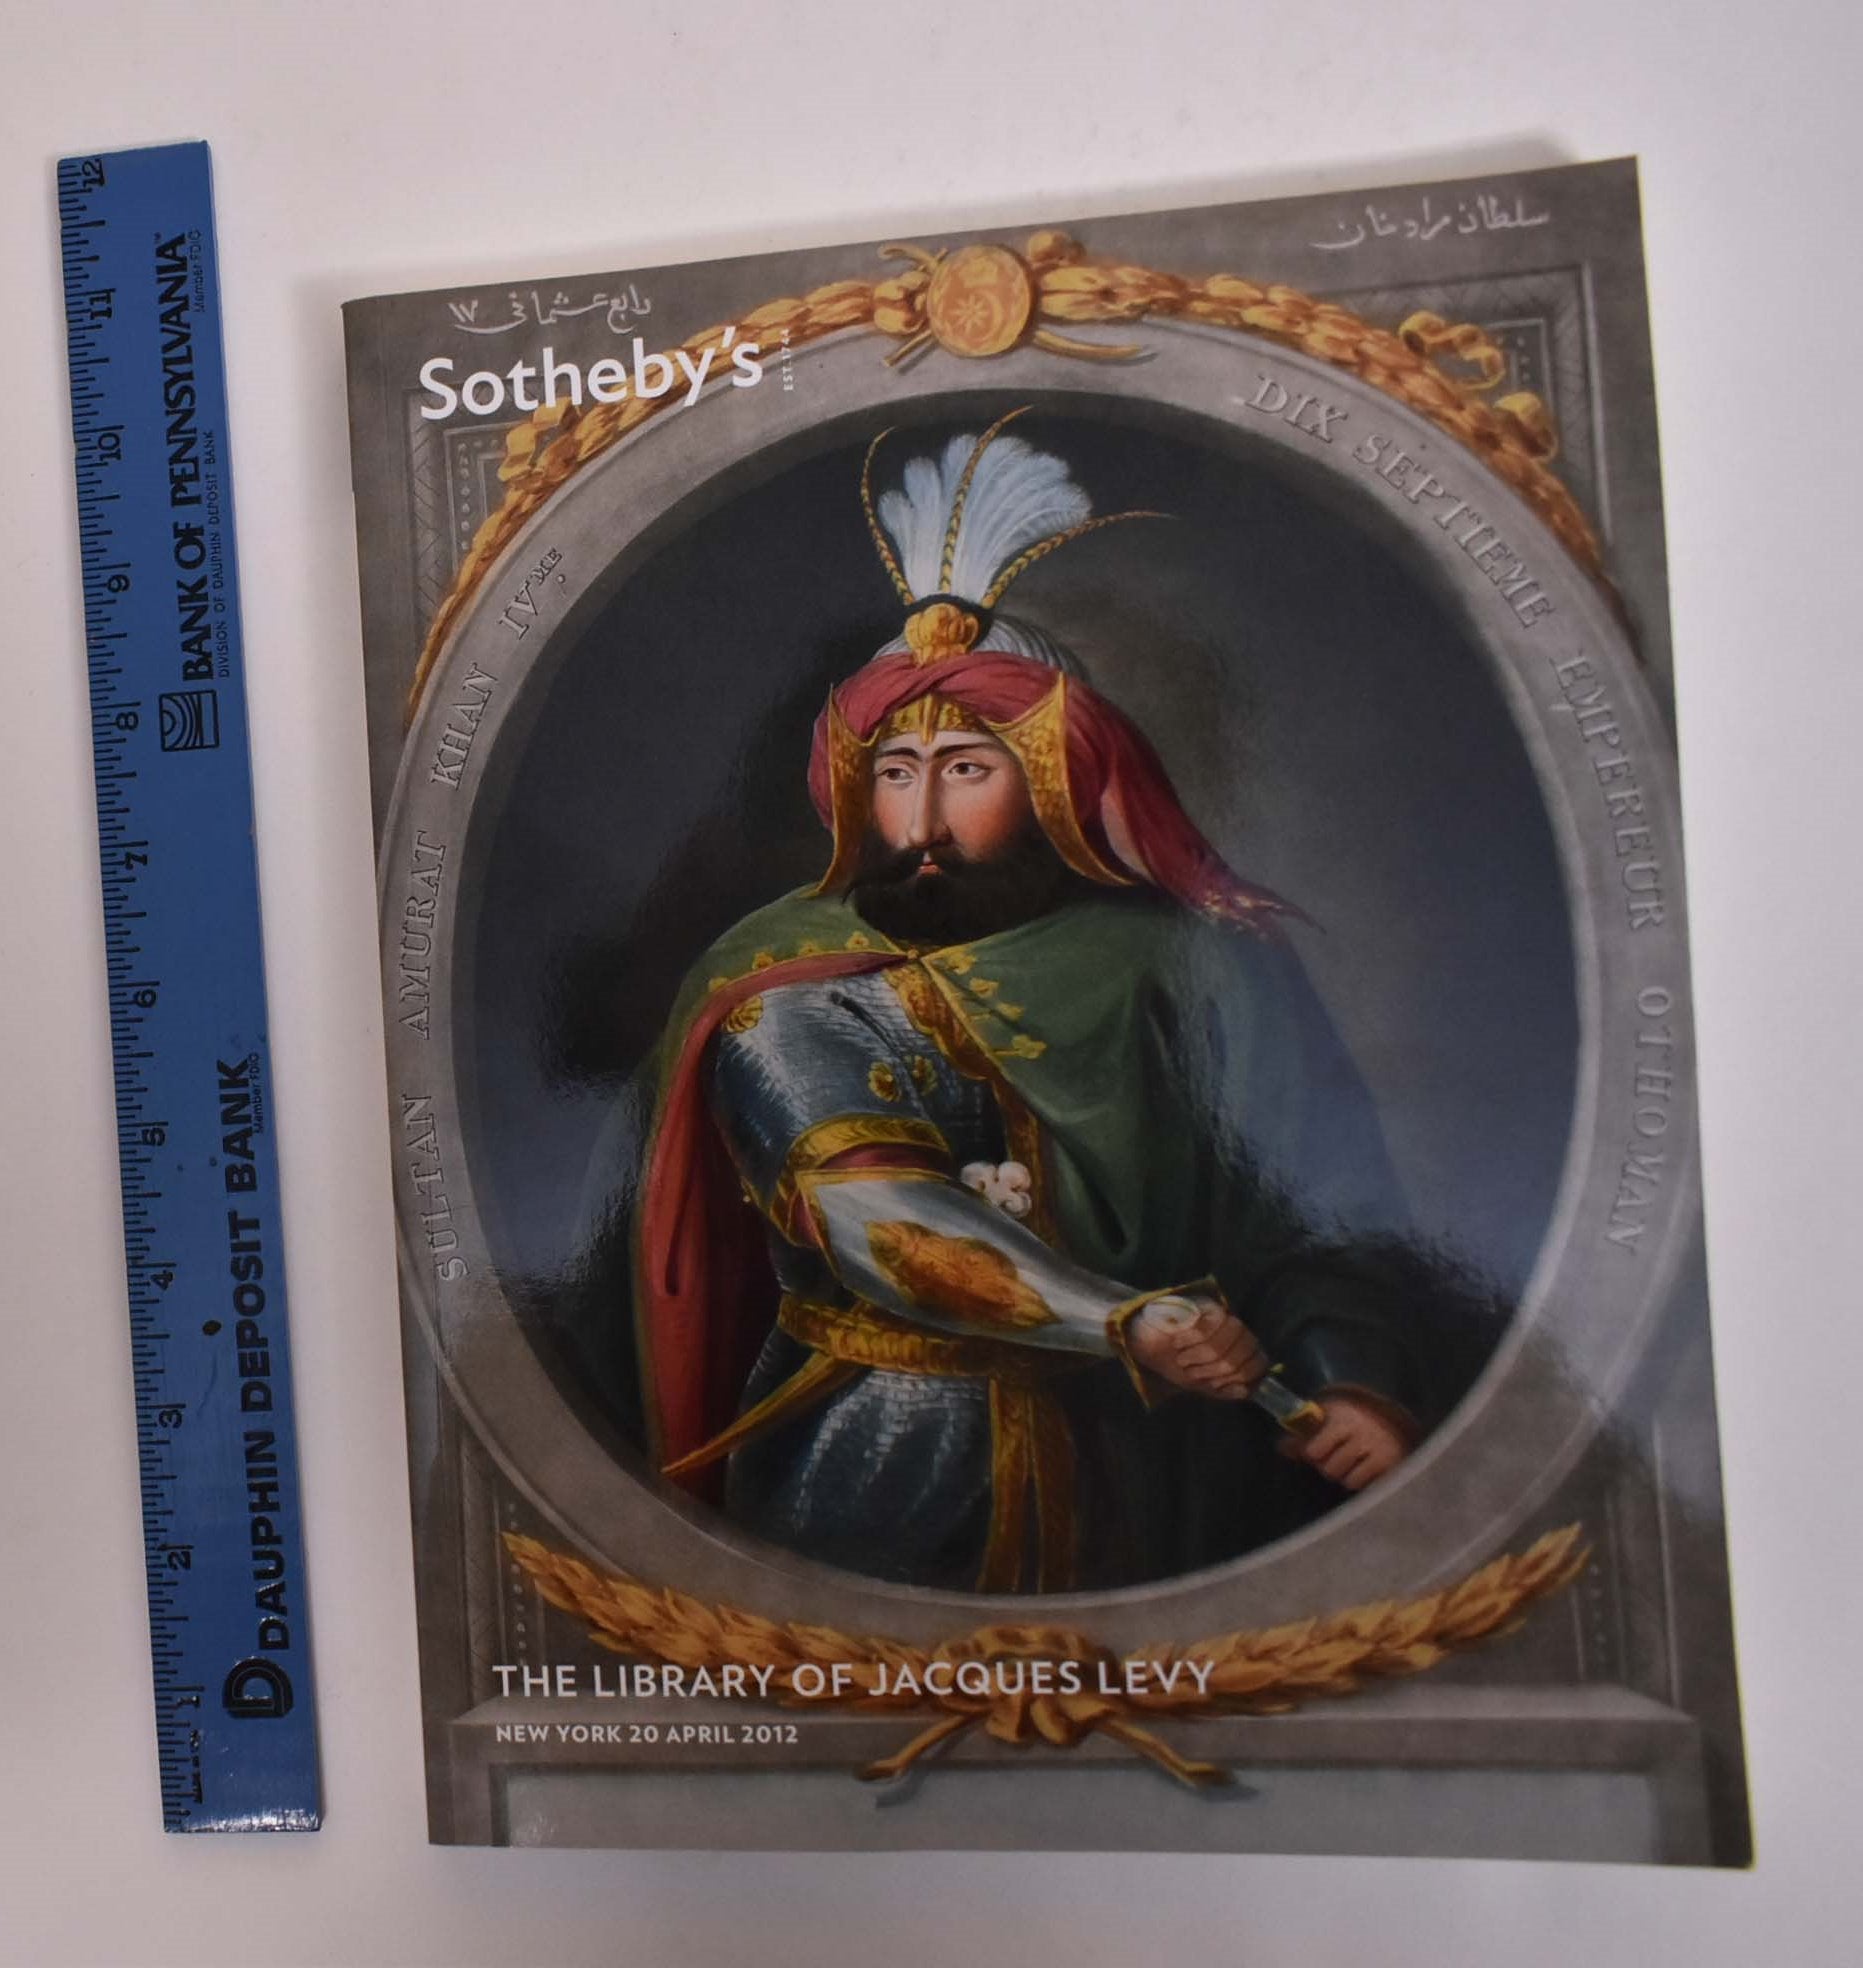 Sotheby's - The Library of Jacques Levy: Sotheby's Auction, New York, 20 April 2012